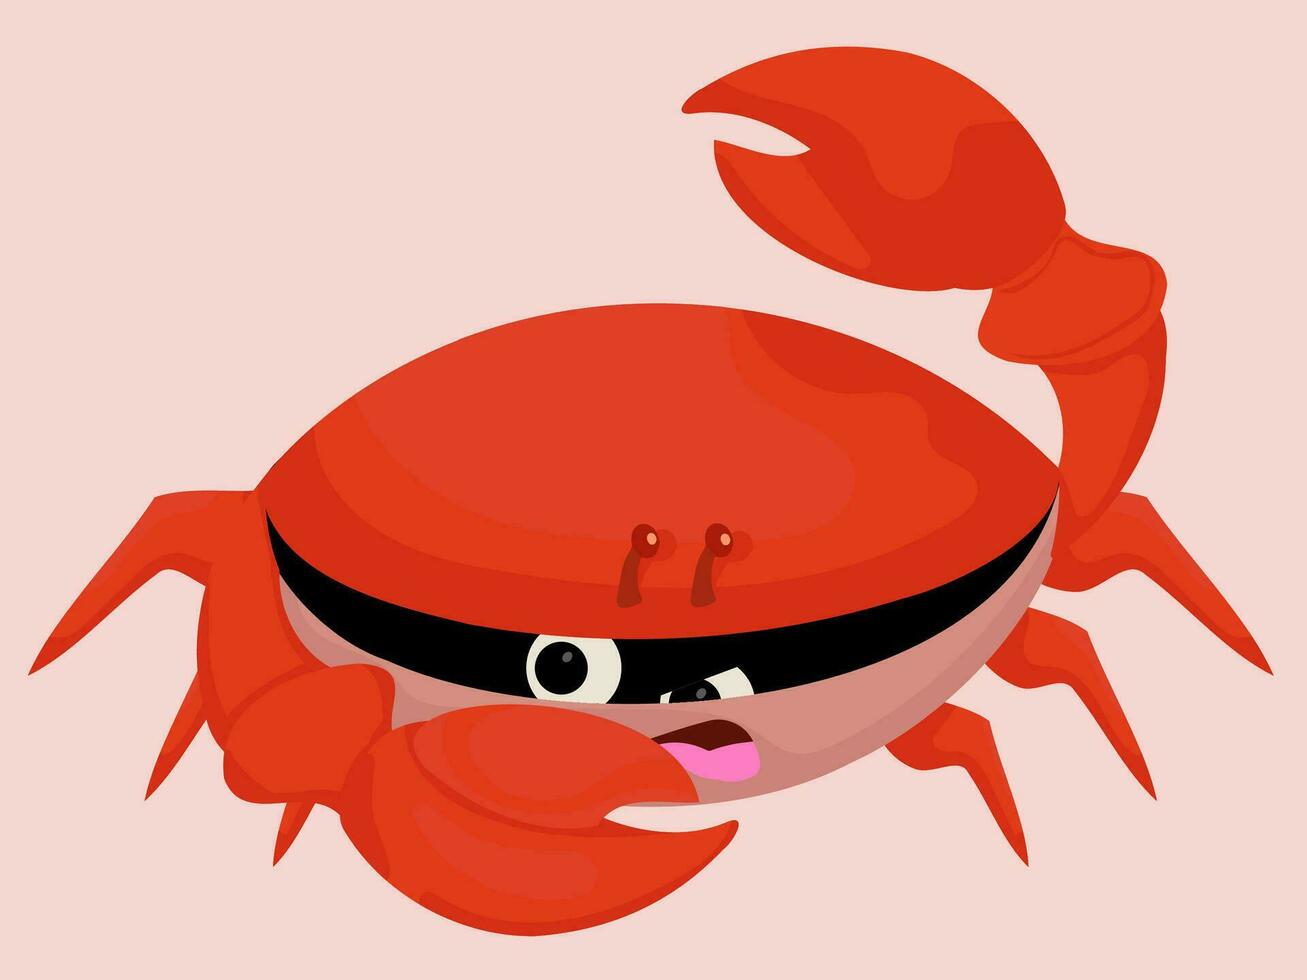 Cute red crab vector illustration in angry pose, flat color style.